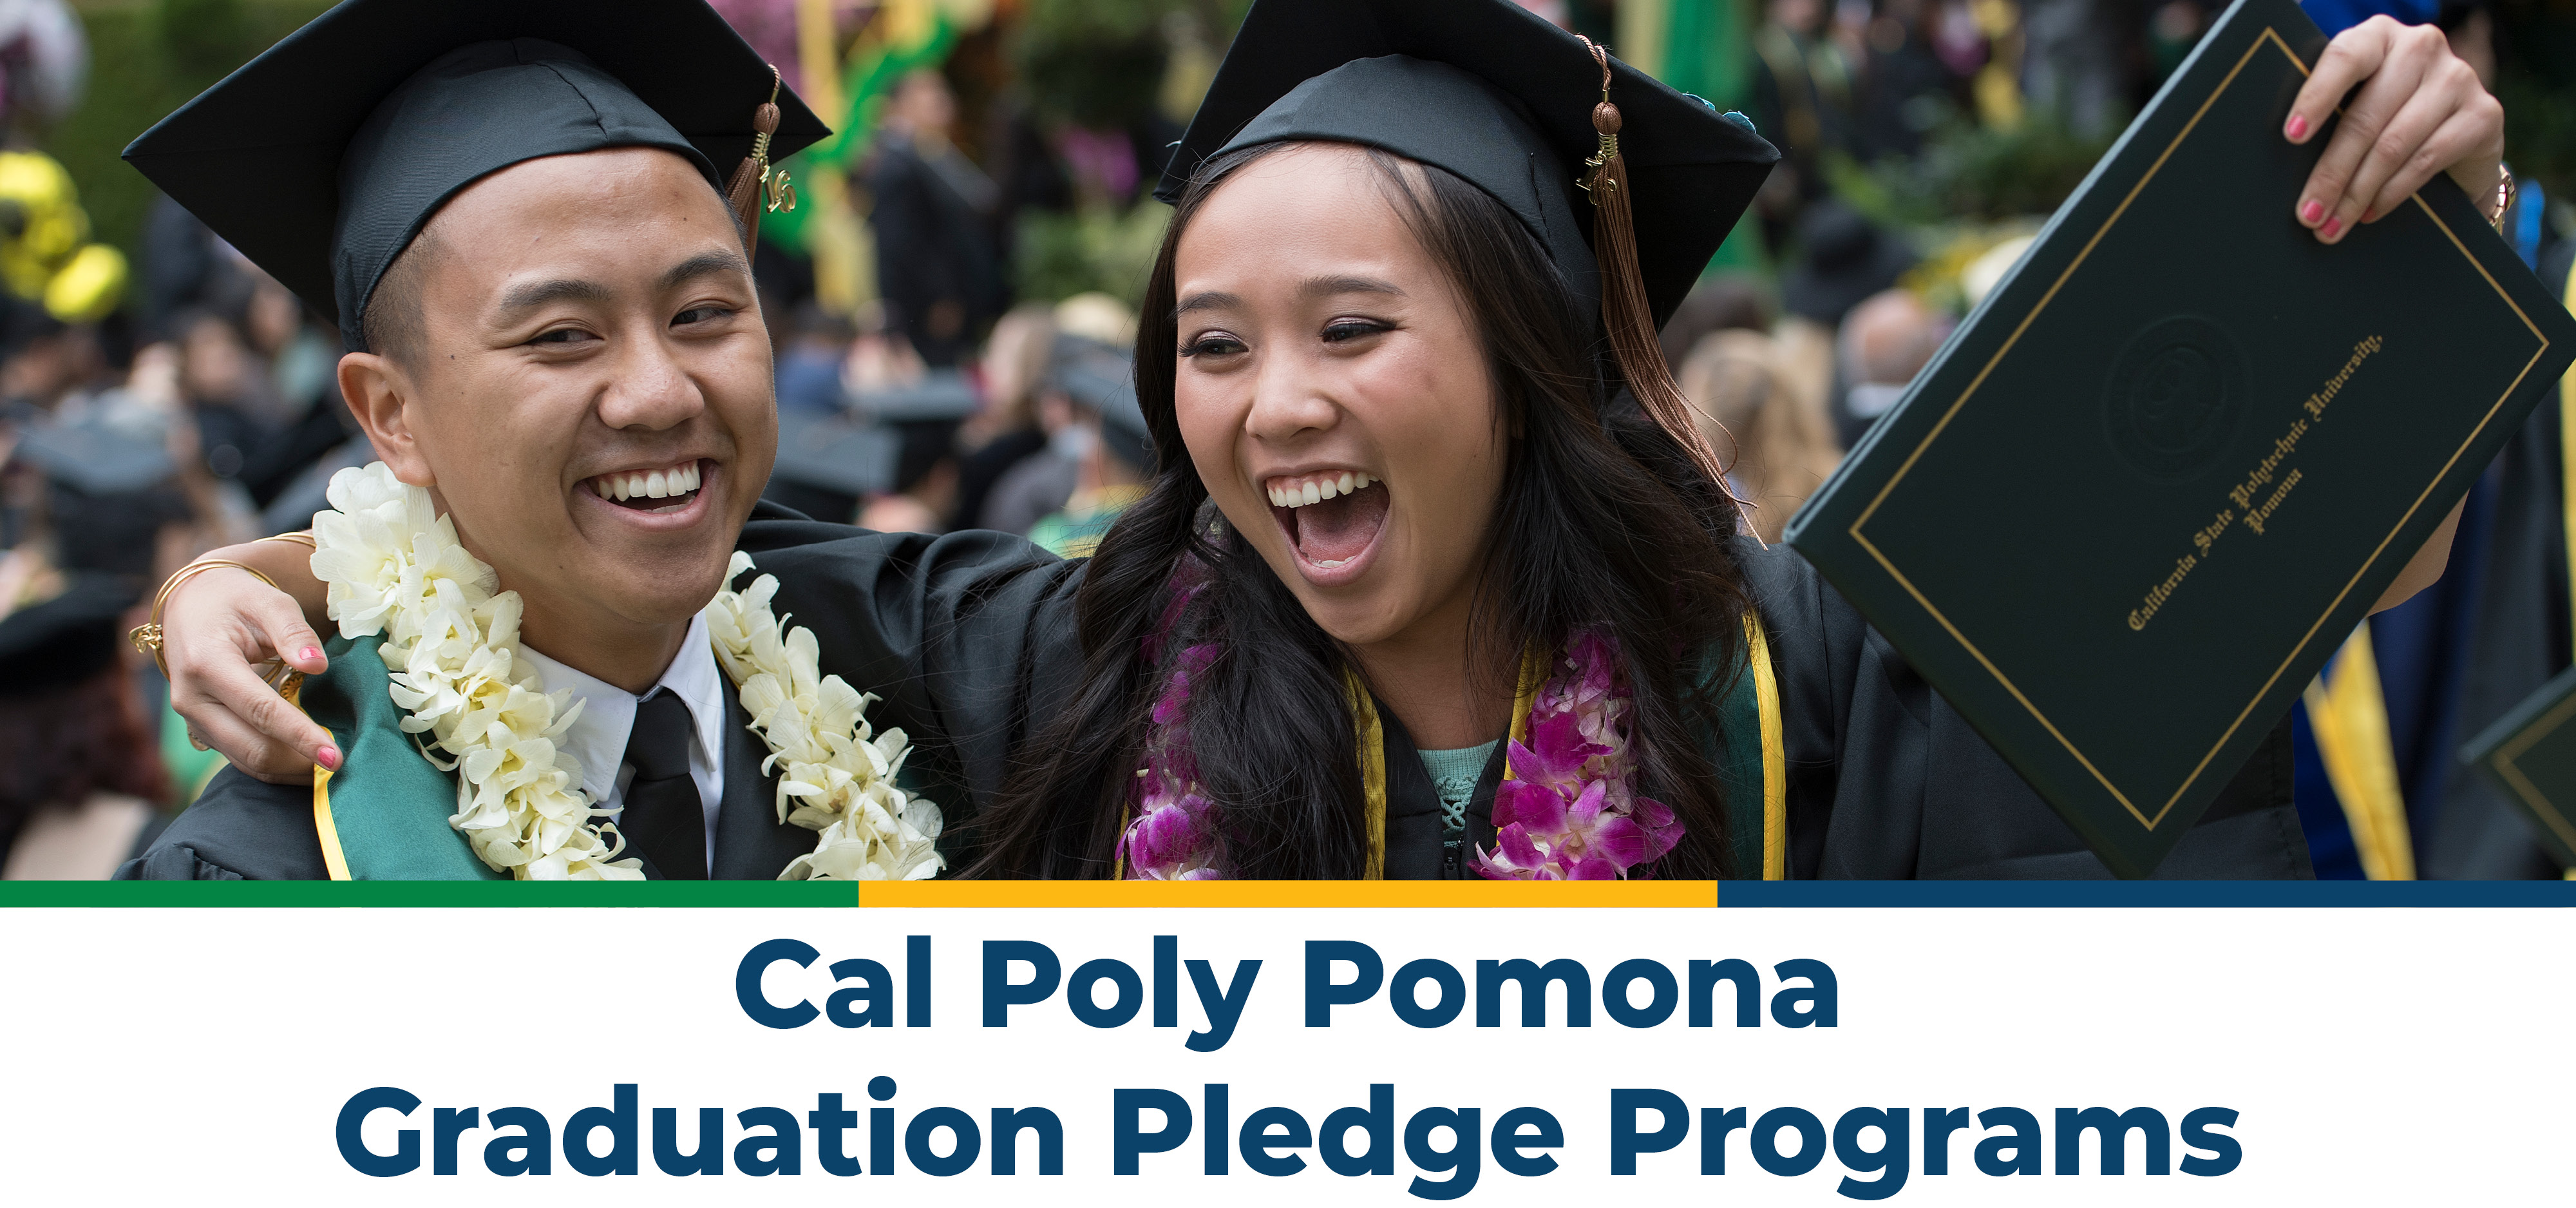 A male student and female student laugh together at Commencement. Text below says Cal Poly Pomona Graduation Pledge programs